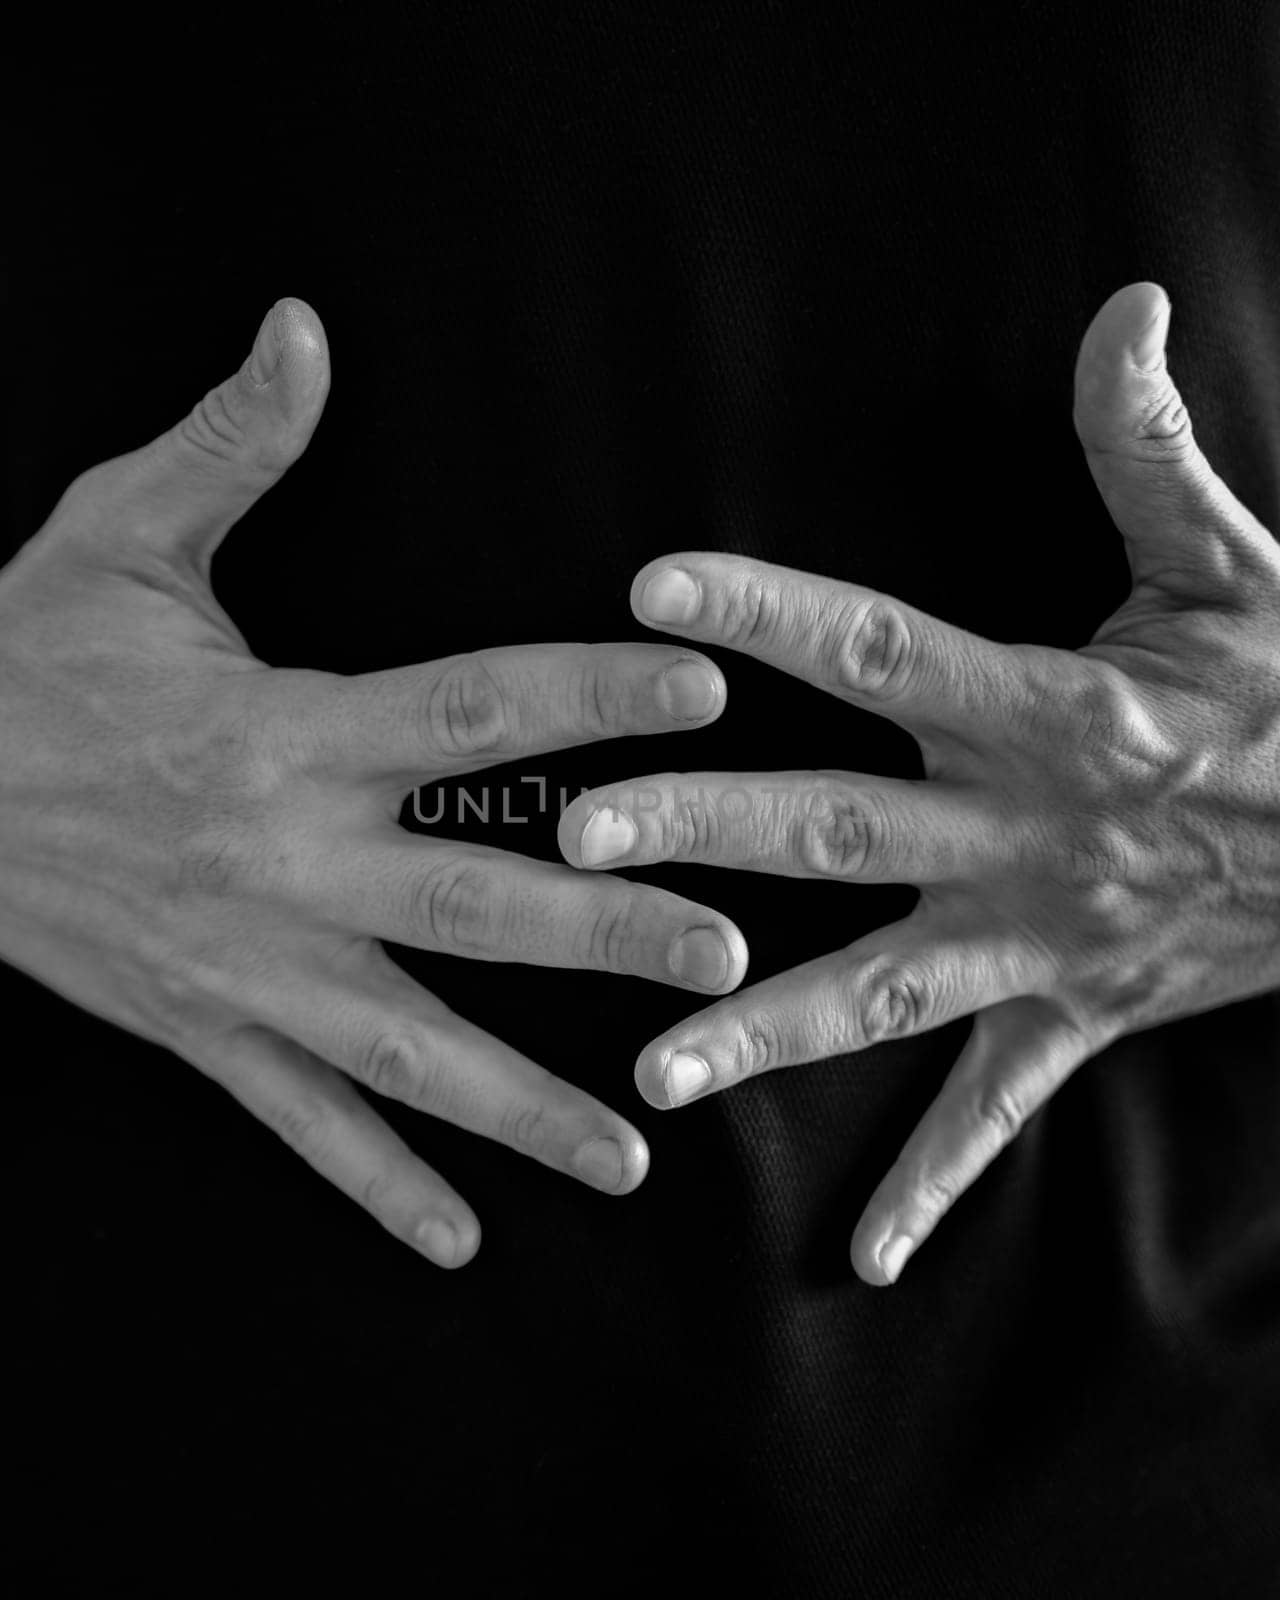 Hands intertwined in a gesture of complexity on a dark background by apavlin